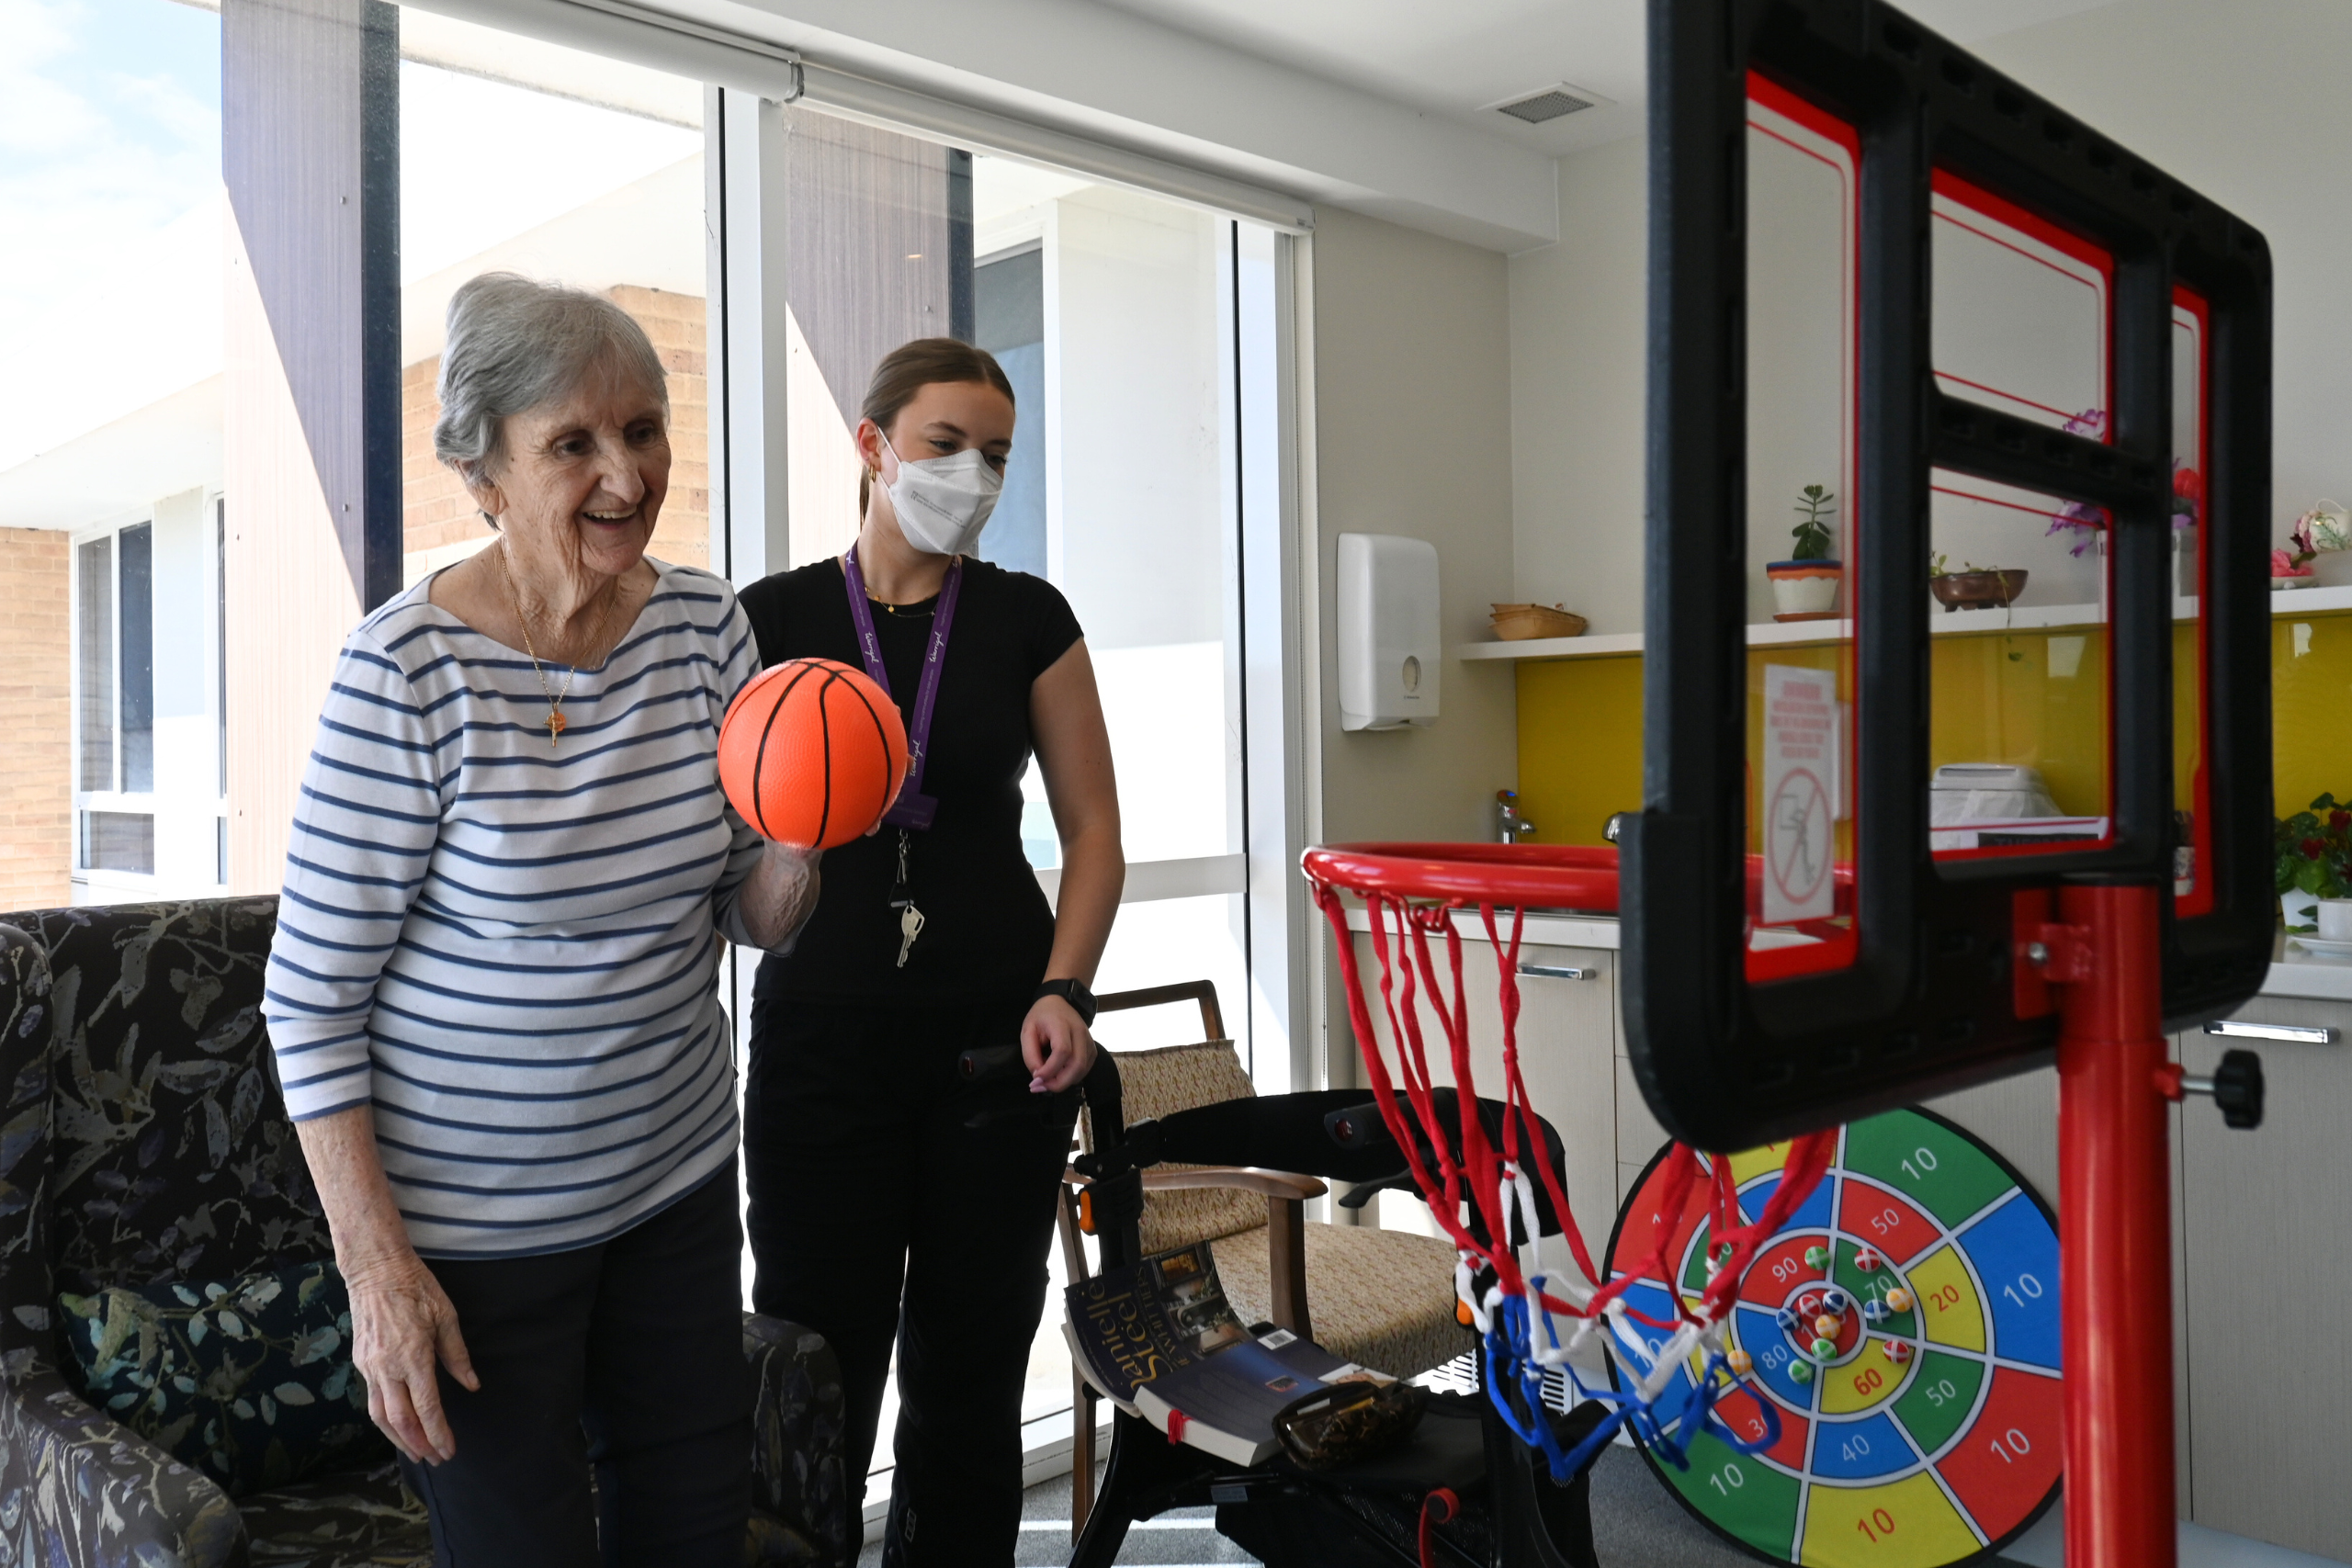 Warrigal aged care resident at Shell Cove in a striped top is holding a basketball and smiling with a staff member nearby